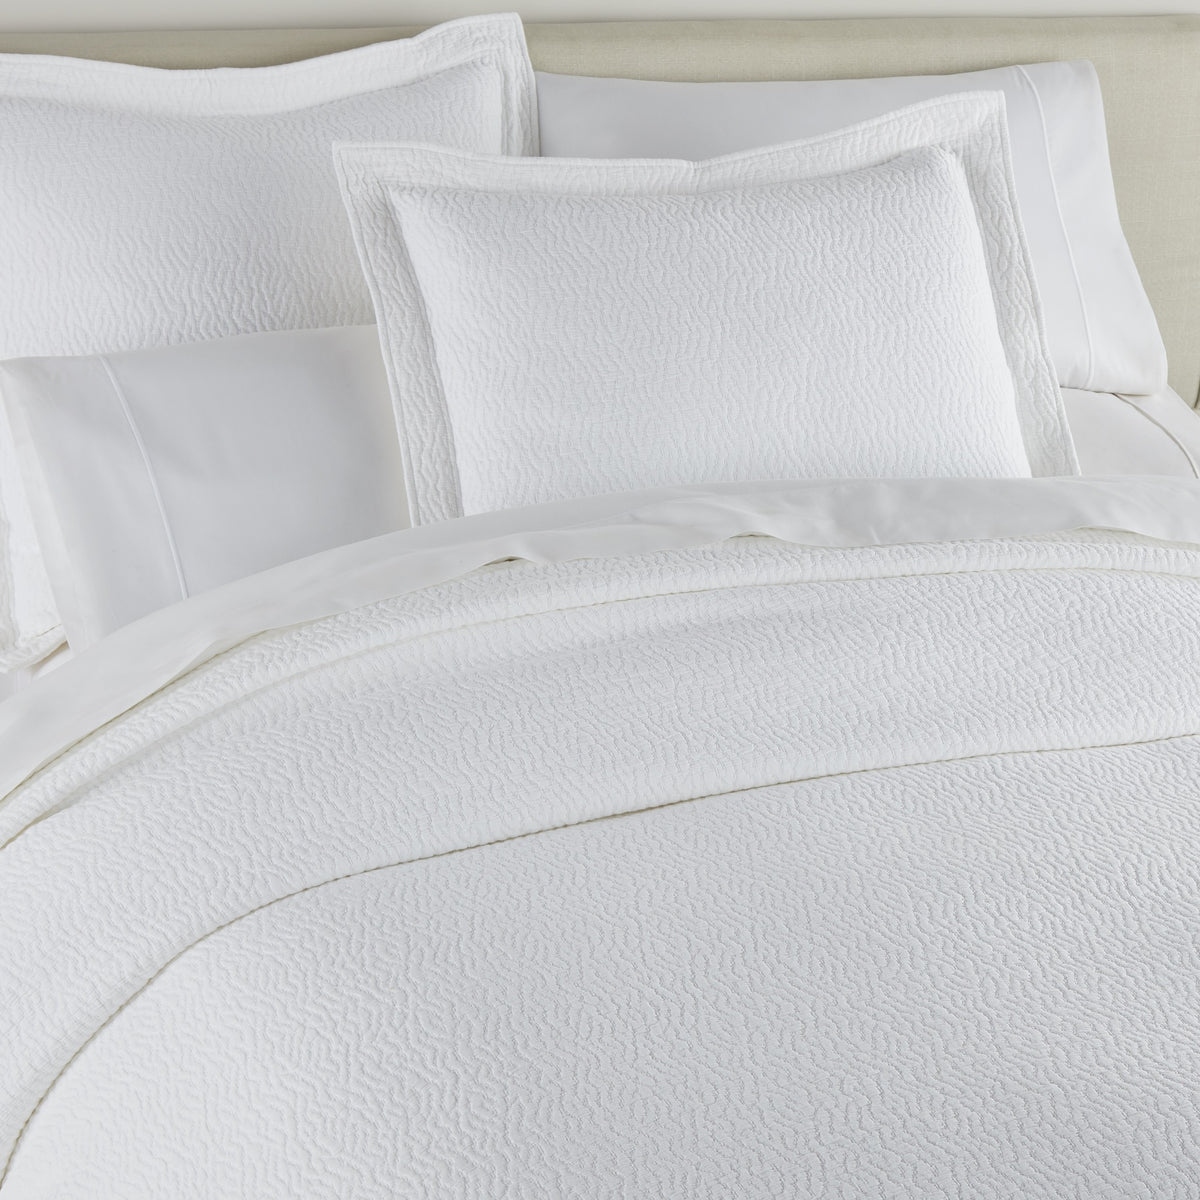 Close Up Image of Peacock Alley Mia Stonewashed Matelassé Bedding in Color White